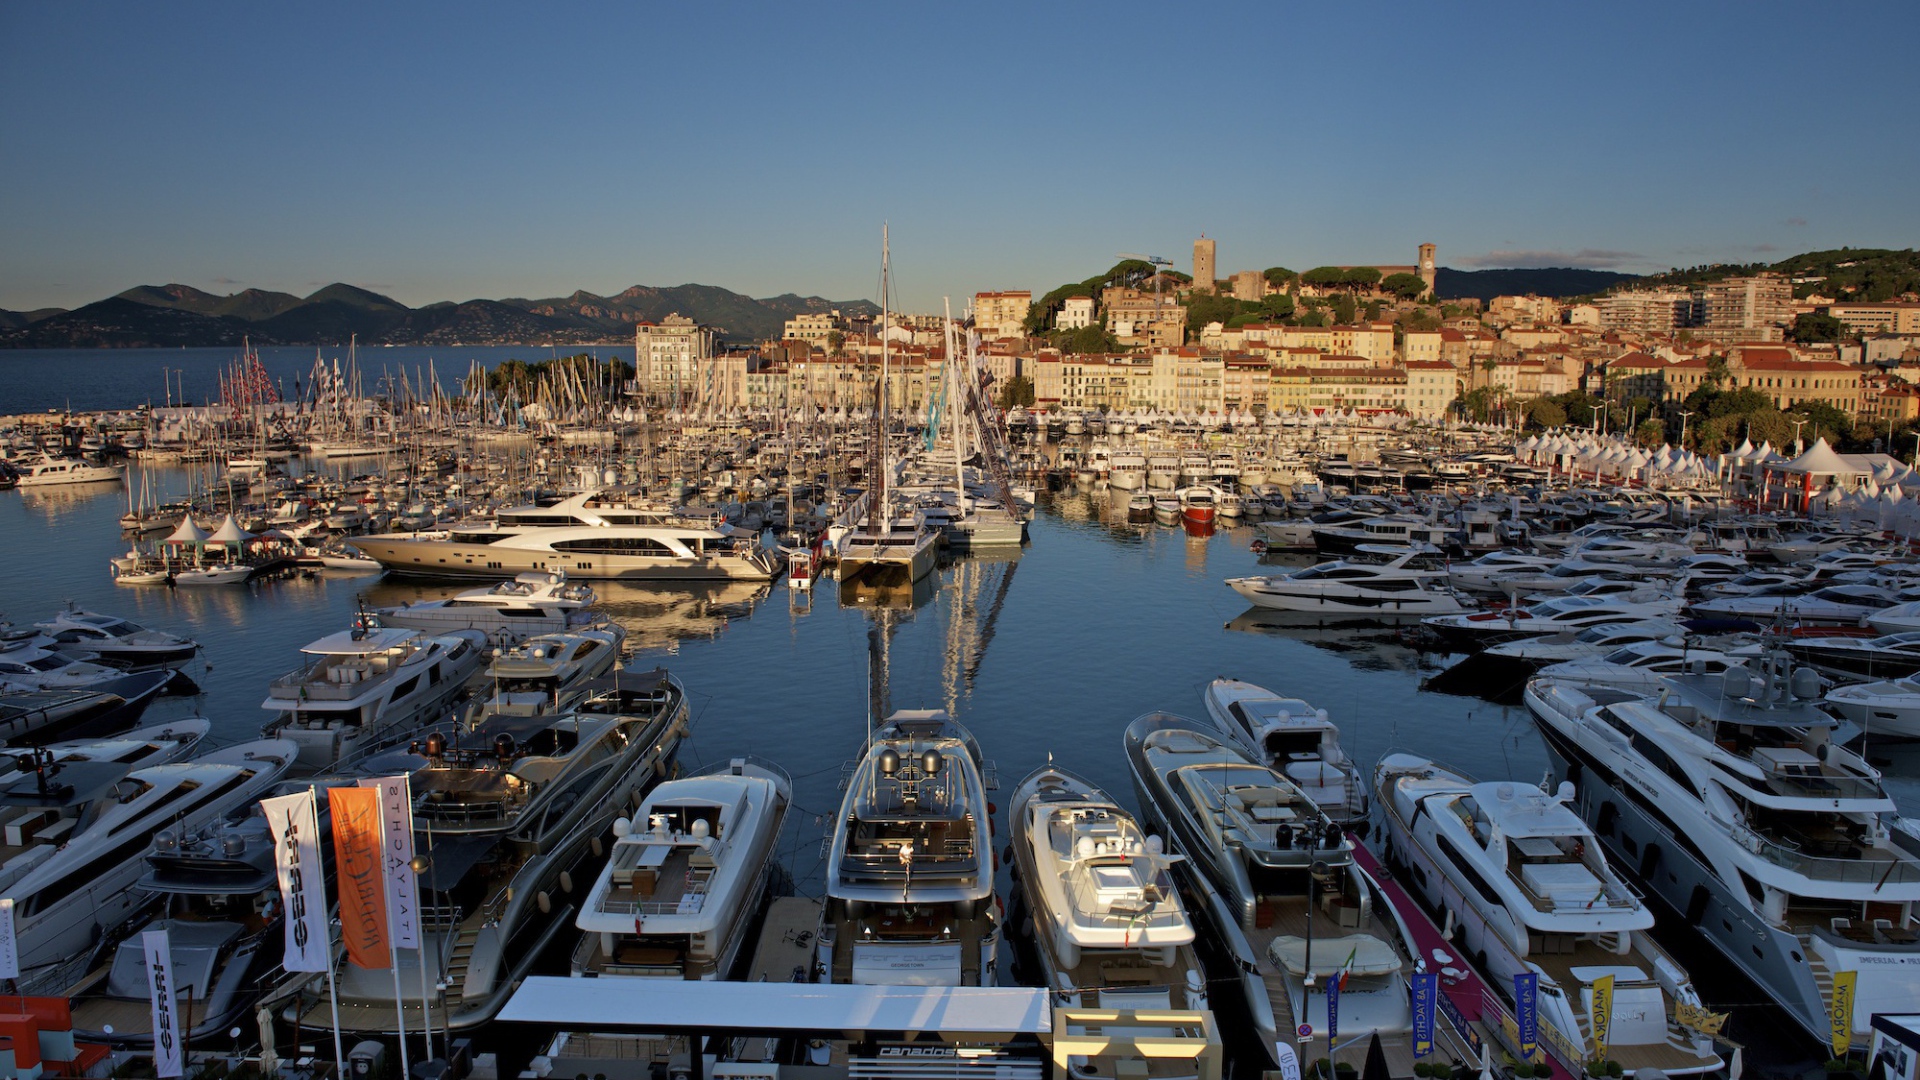 Boats in the port of Cannes, France